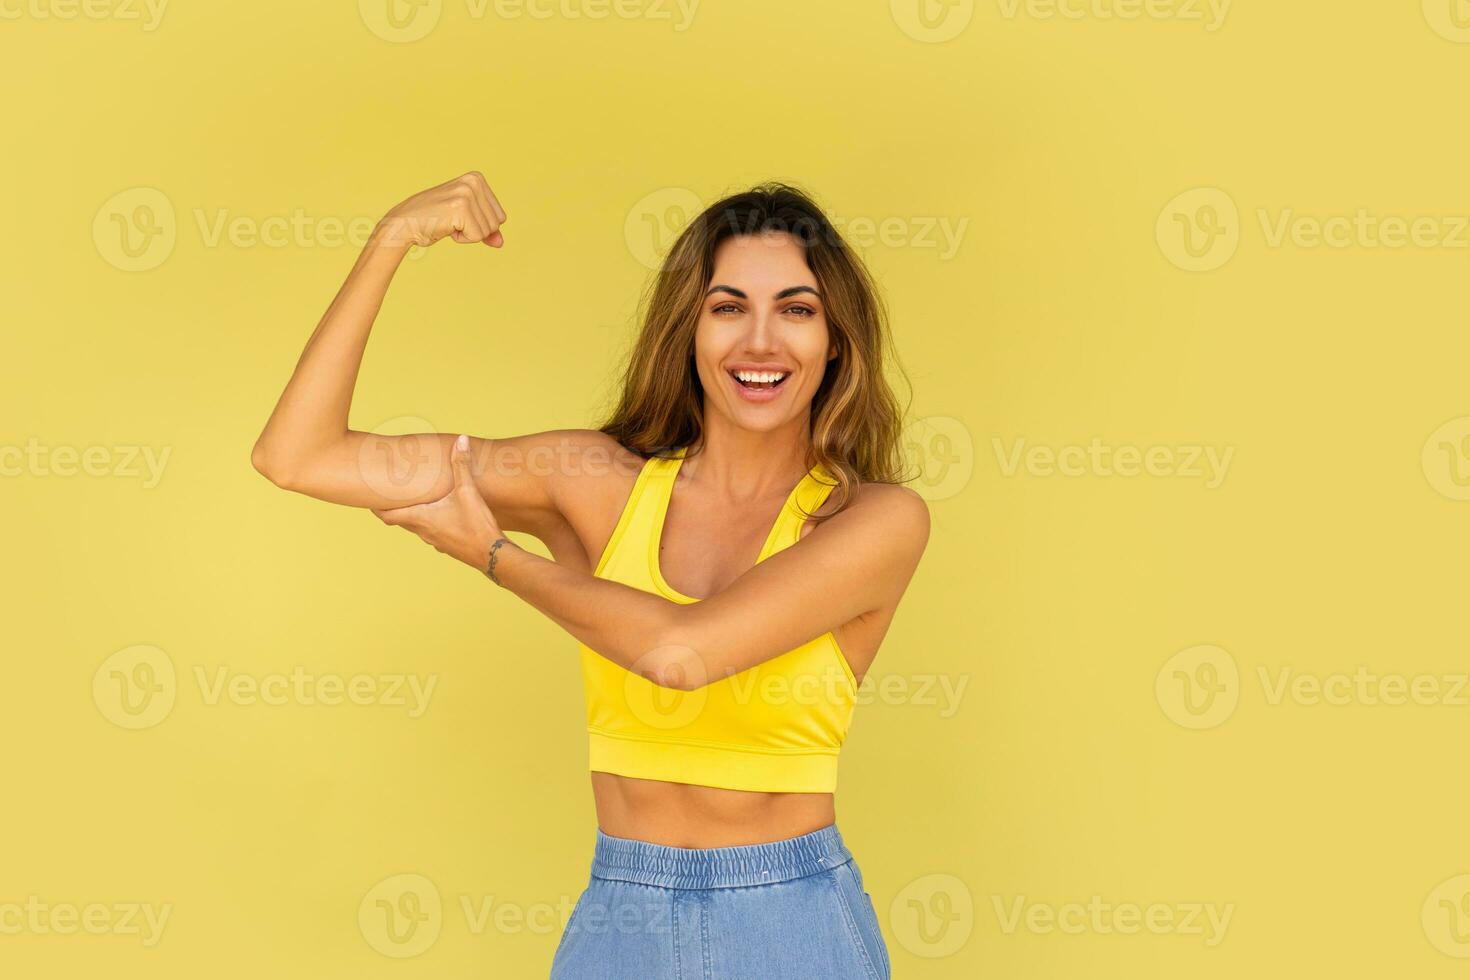 Studio photo of pretty brunette woman in sportive outfit posing on yellow background.